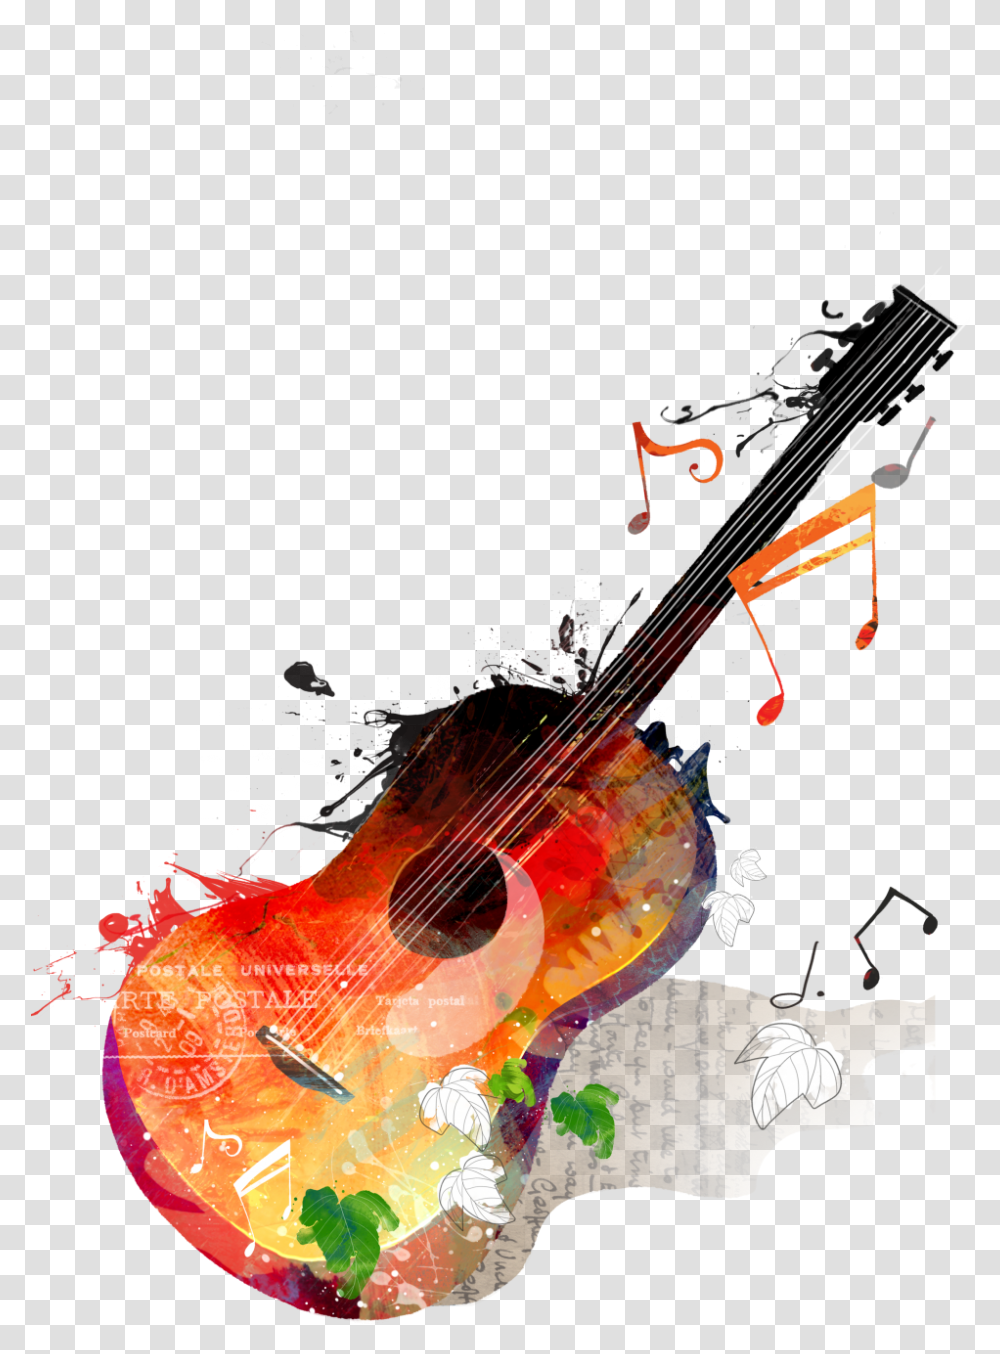 Cello Image Musical Instruments Hd, Guitar, Leisure Activities, Violin, Fiddle Transparent Png